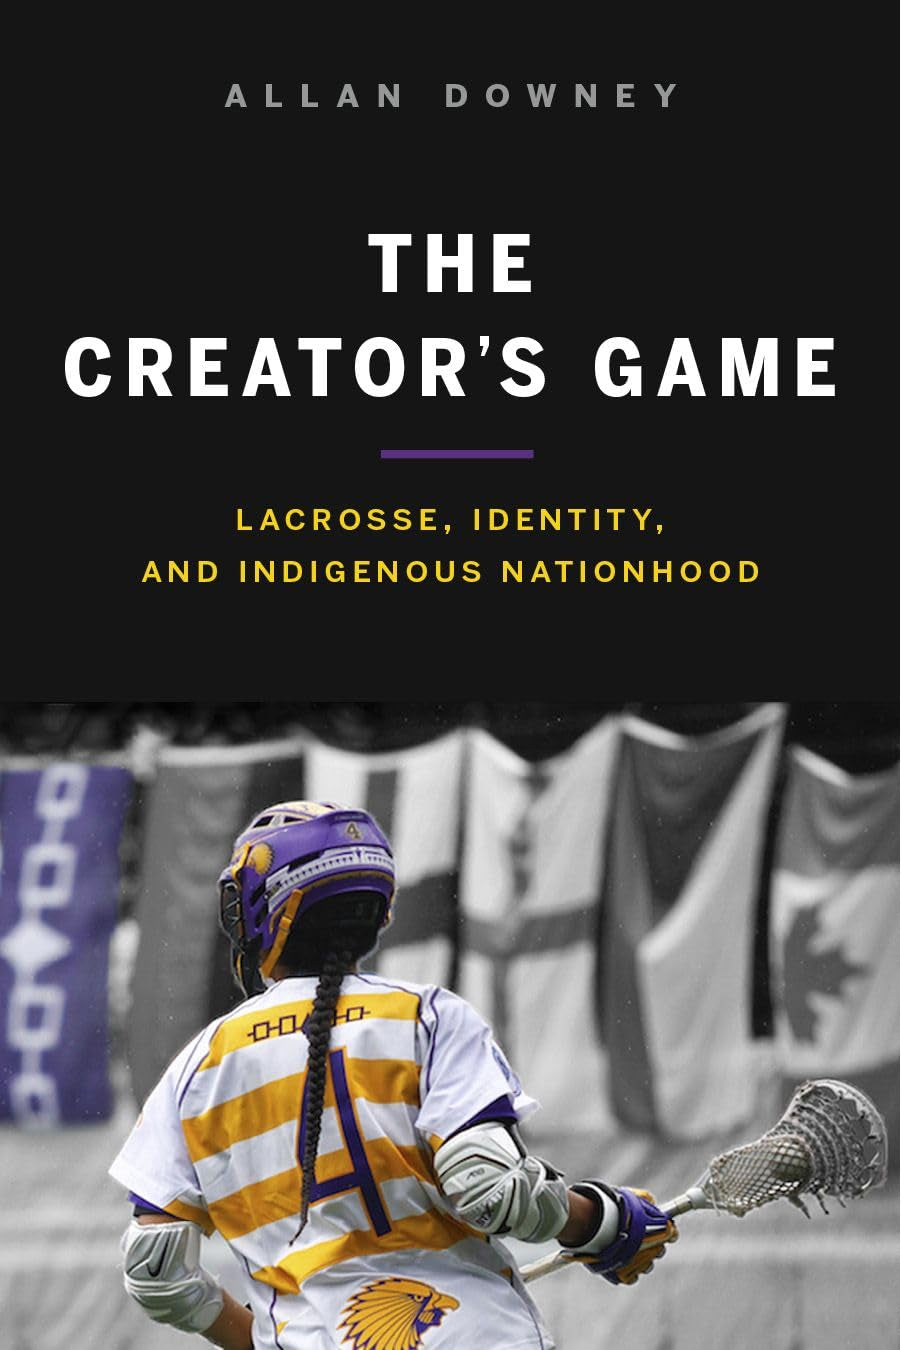 The Creator’s Game: Lacrosse, Identity, and Indigenous Nationhood - Front 